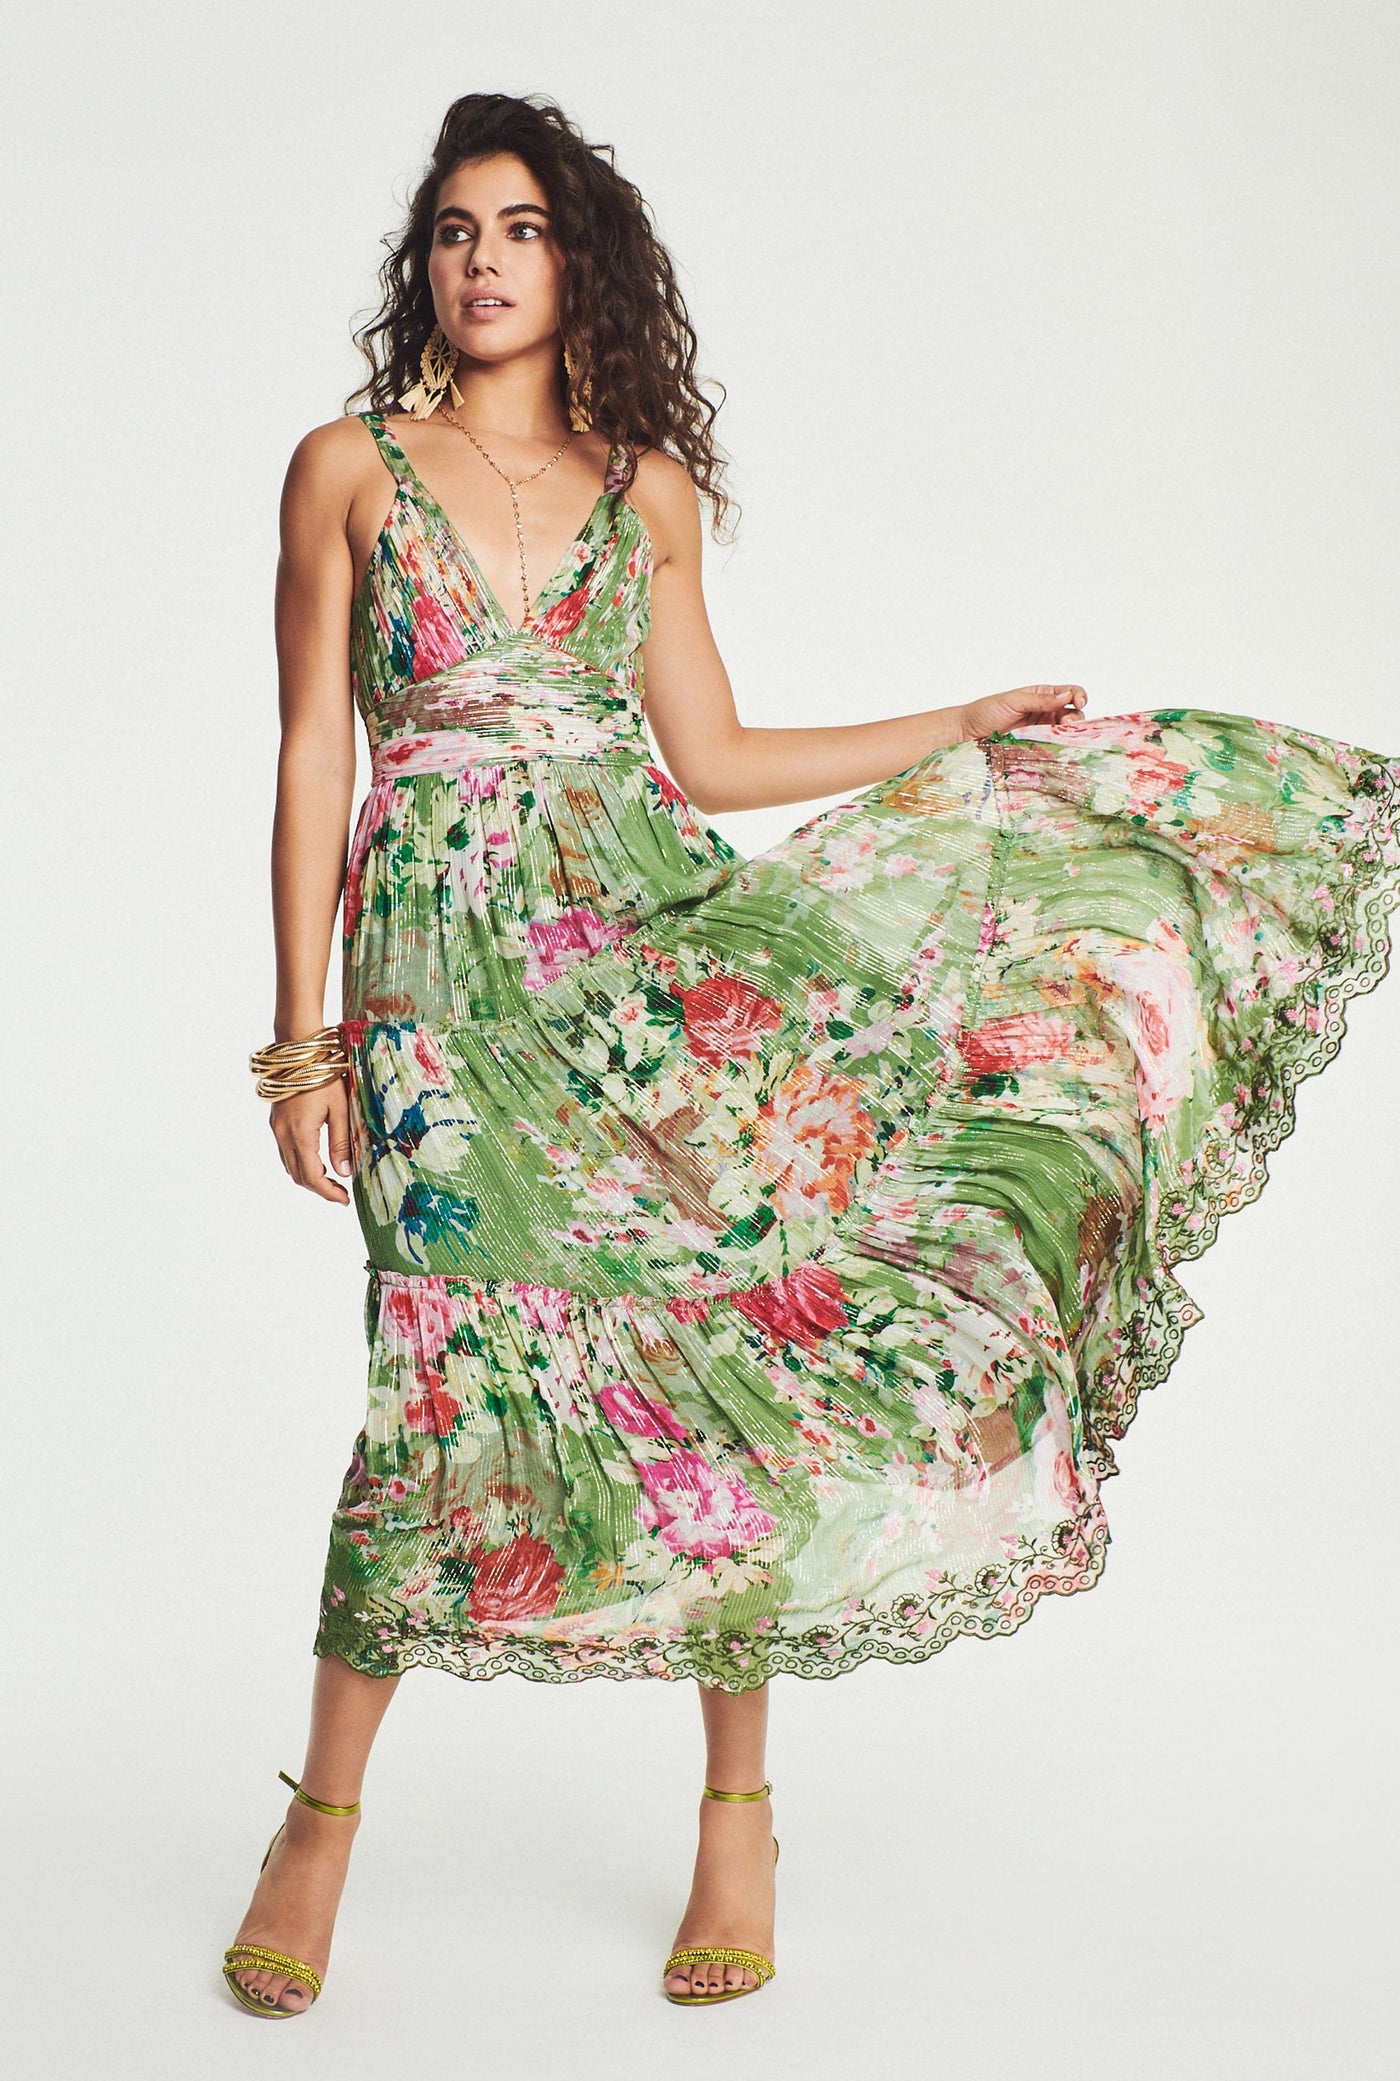 Zaria Plunged Partywear Floral Long Dress